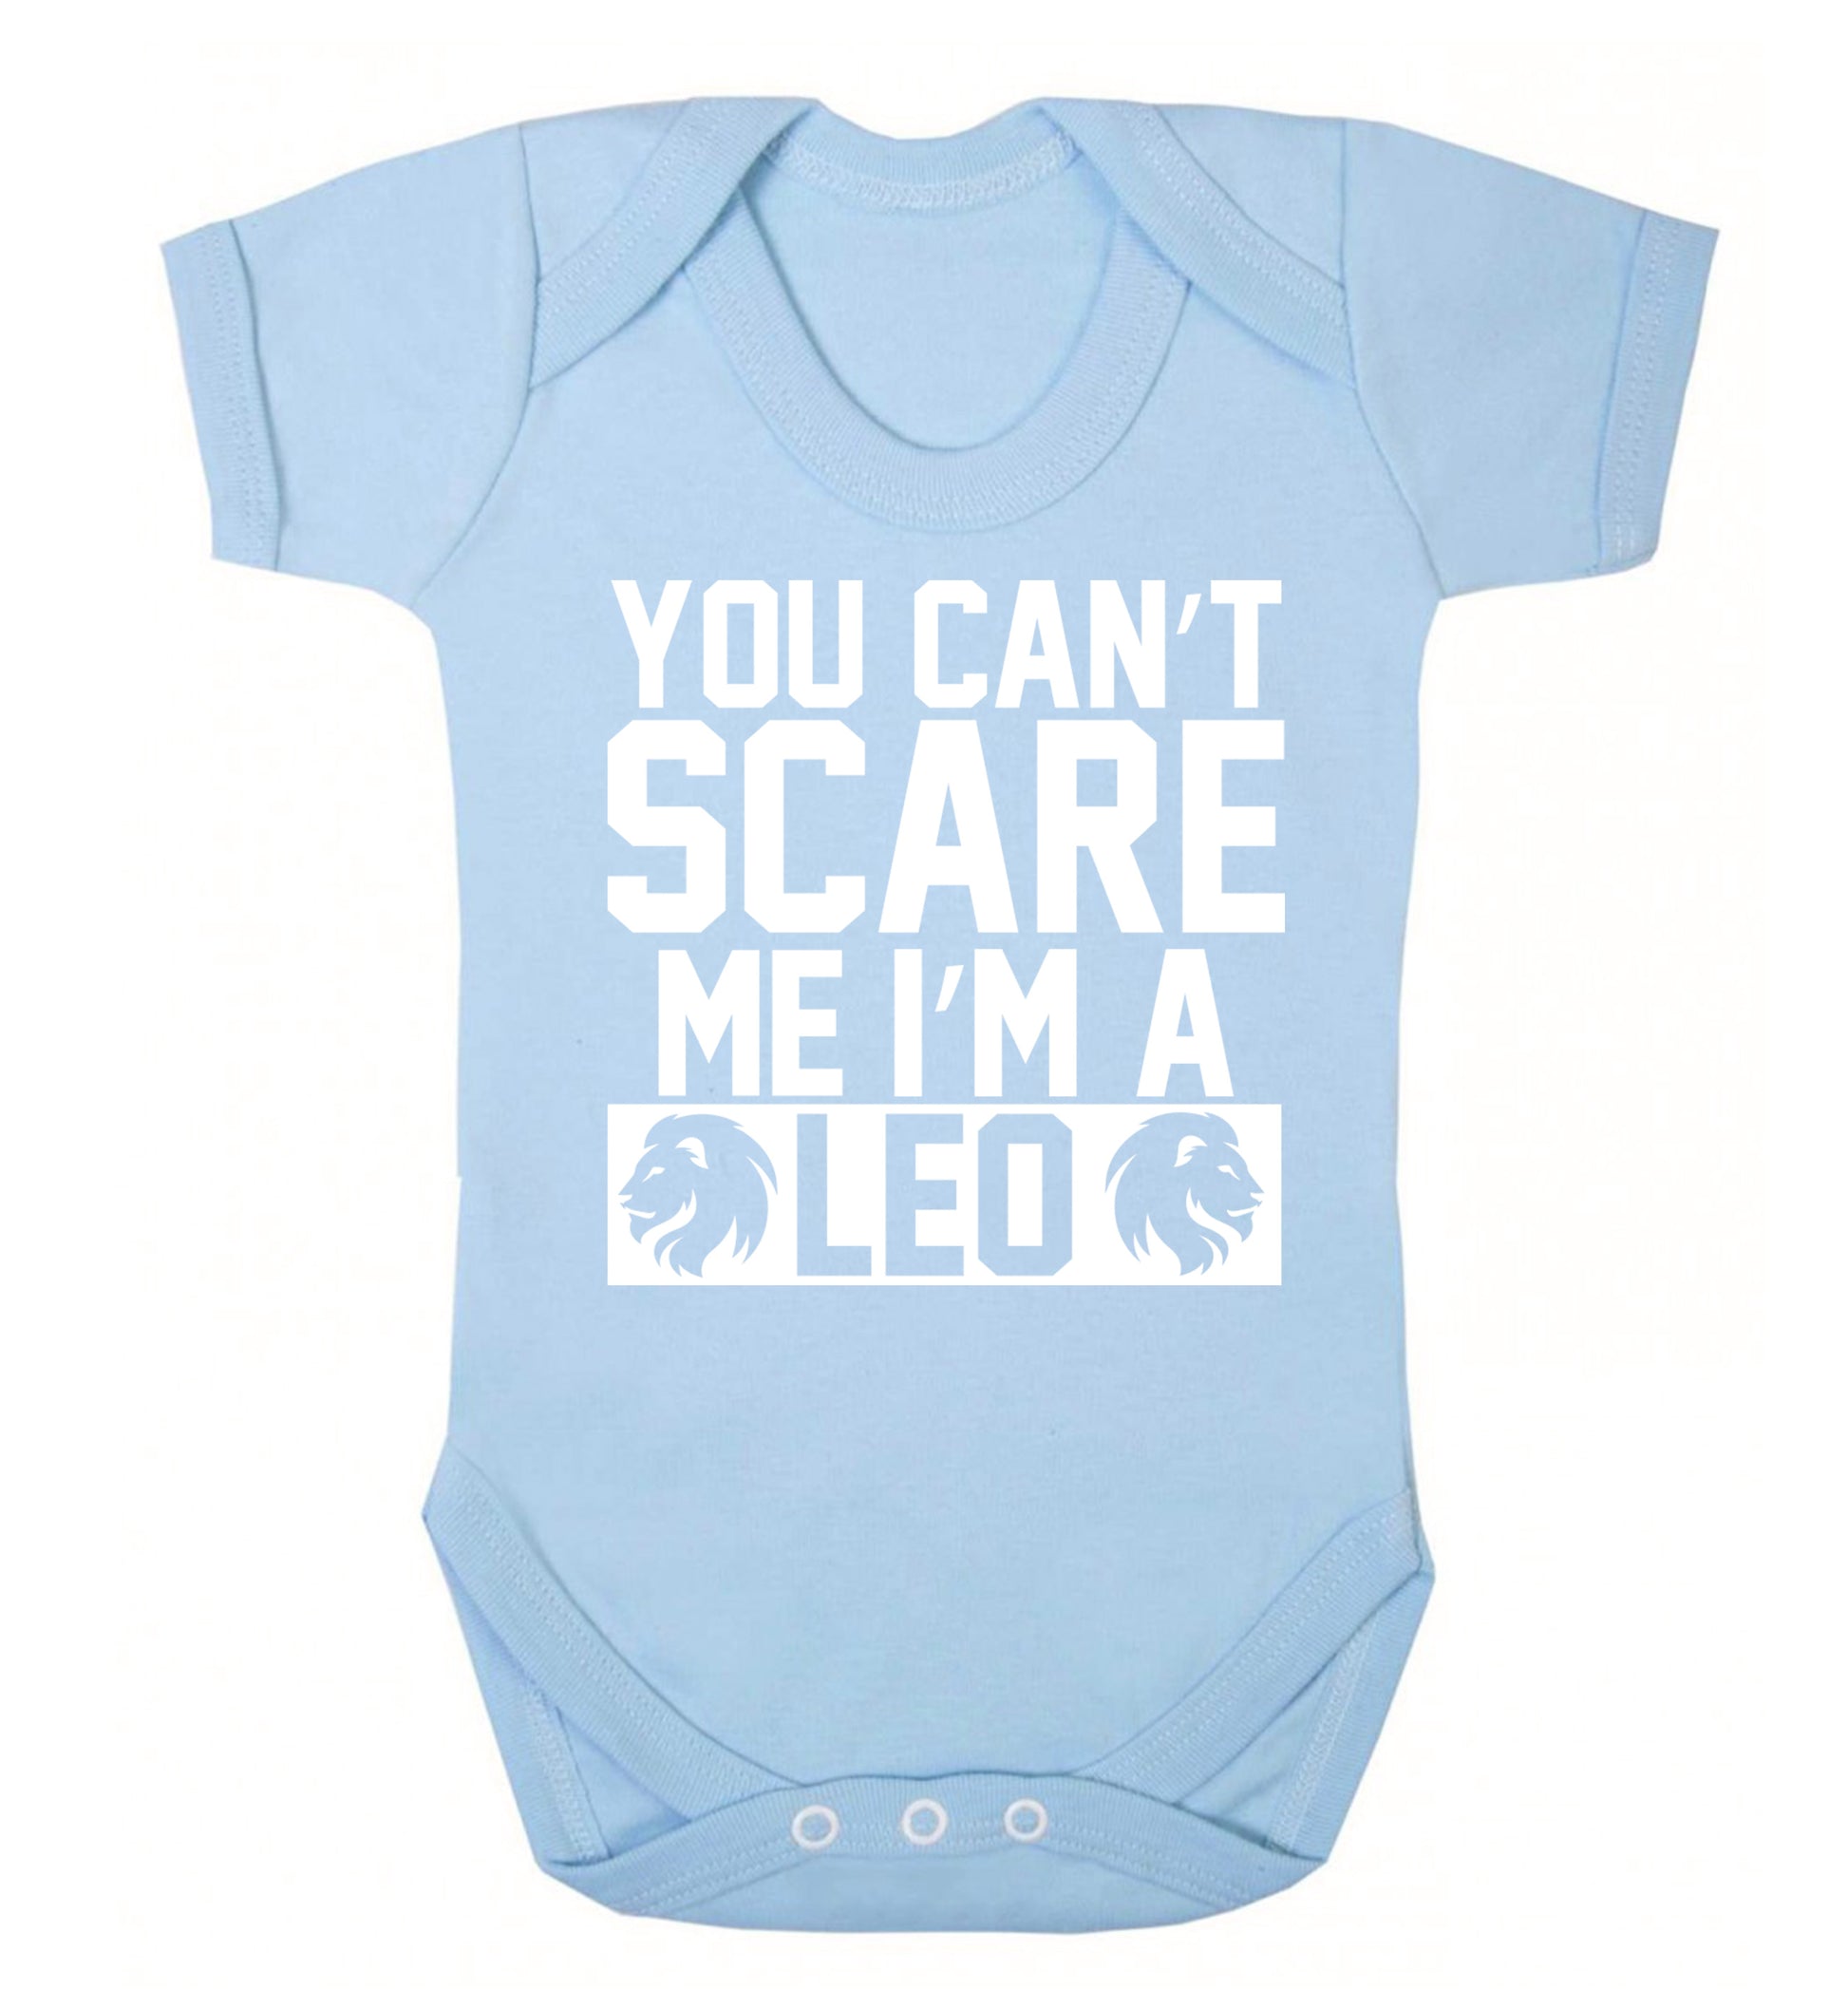 You can't scare me I'm a leo Baby Vest pale blue 18-24 months